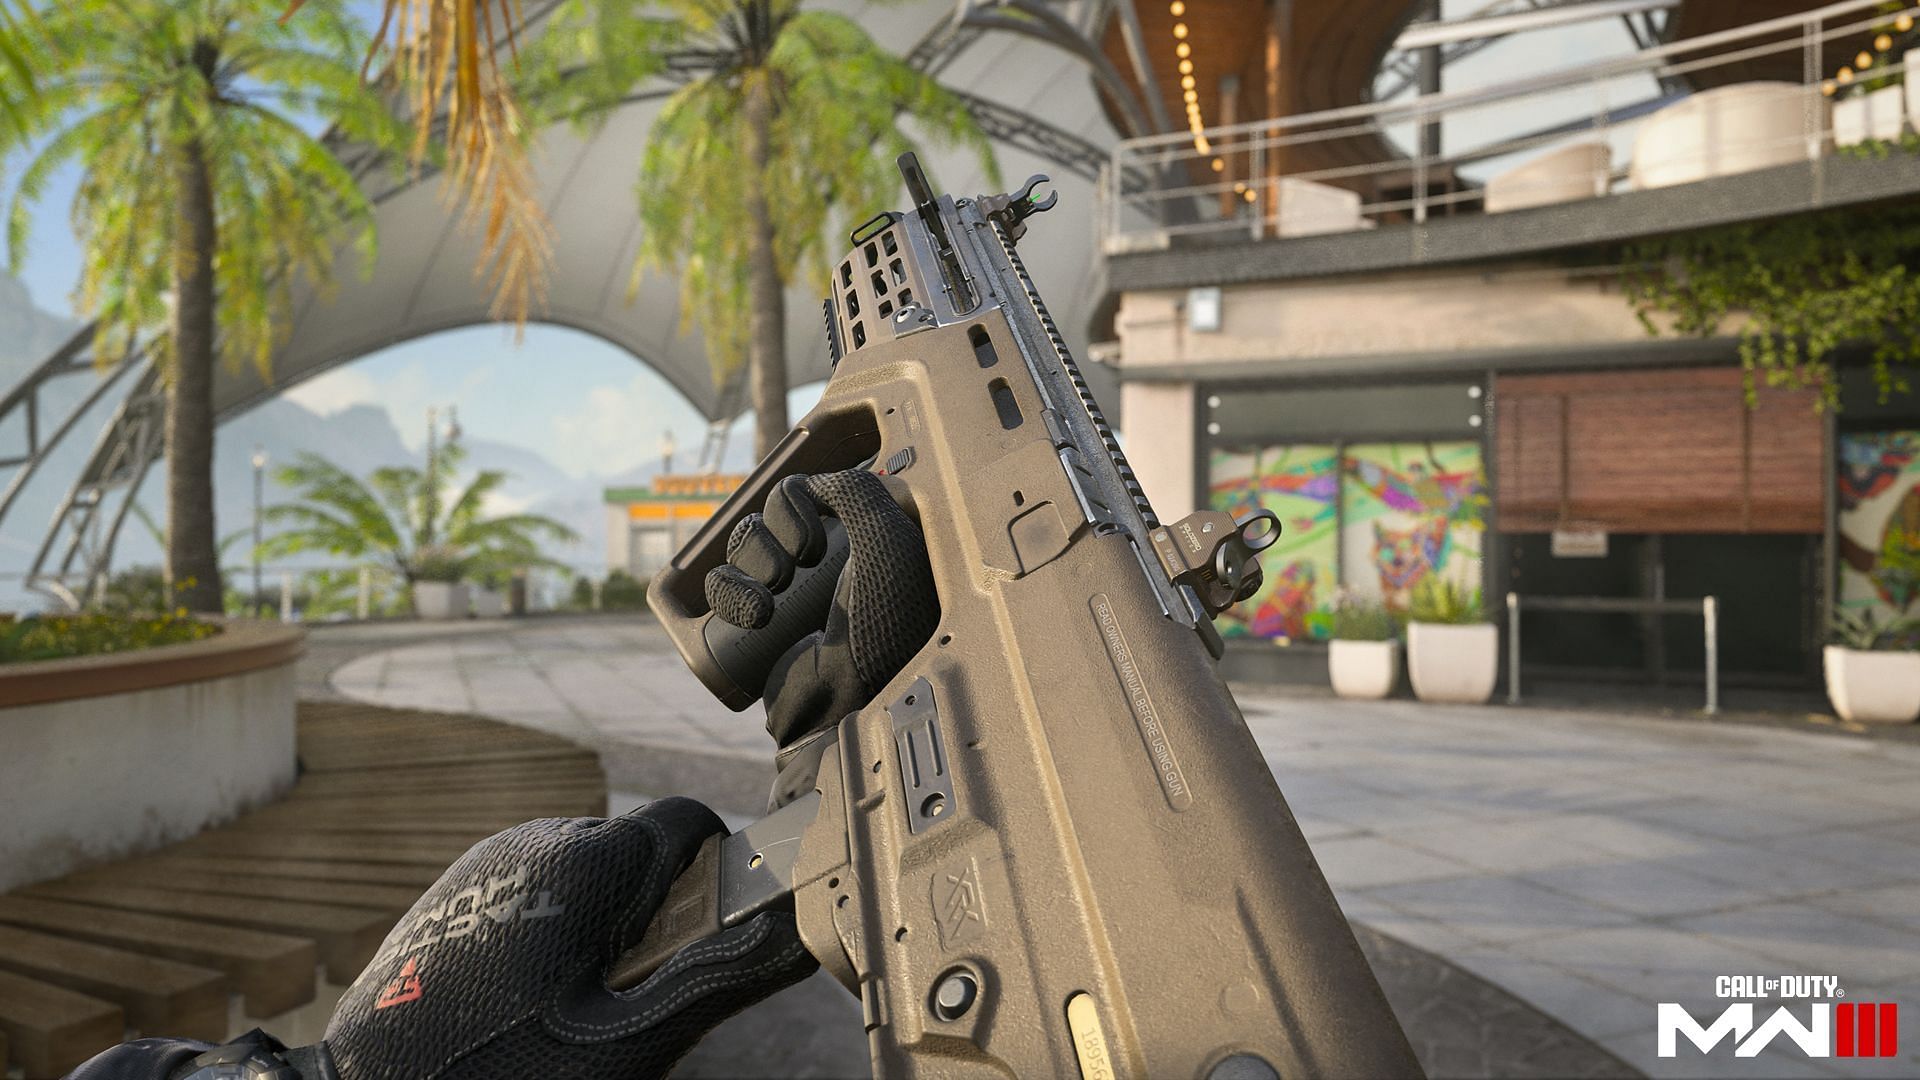 RAM-9 SMG in WZ (Image via Activision)